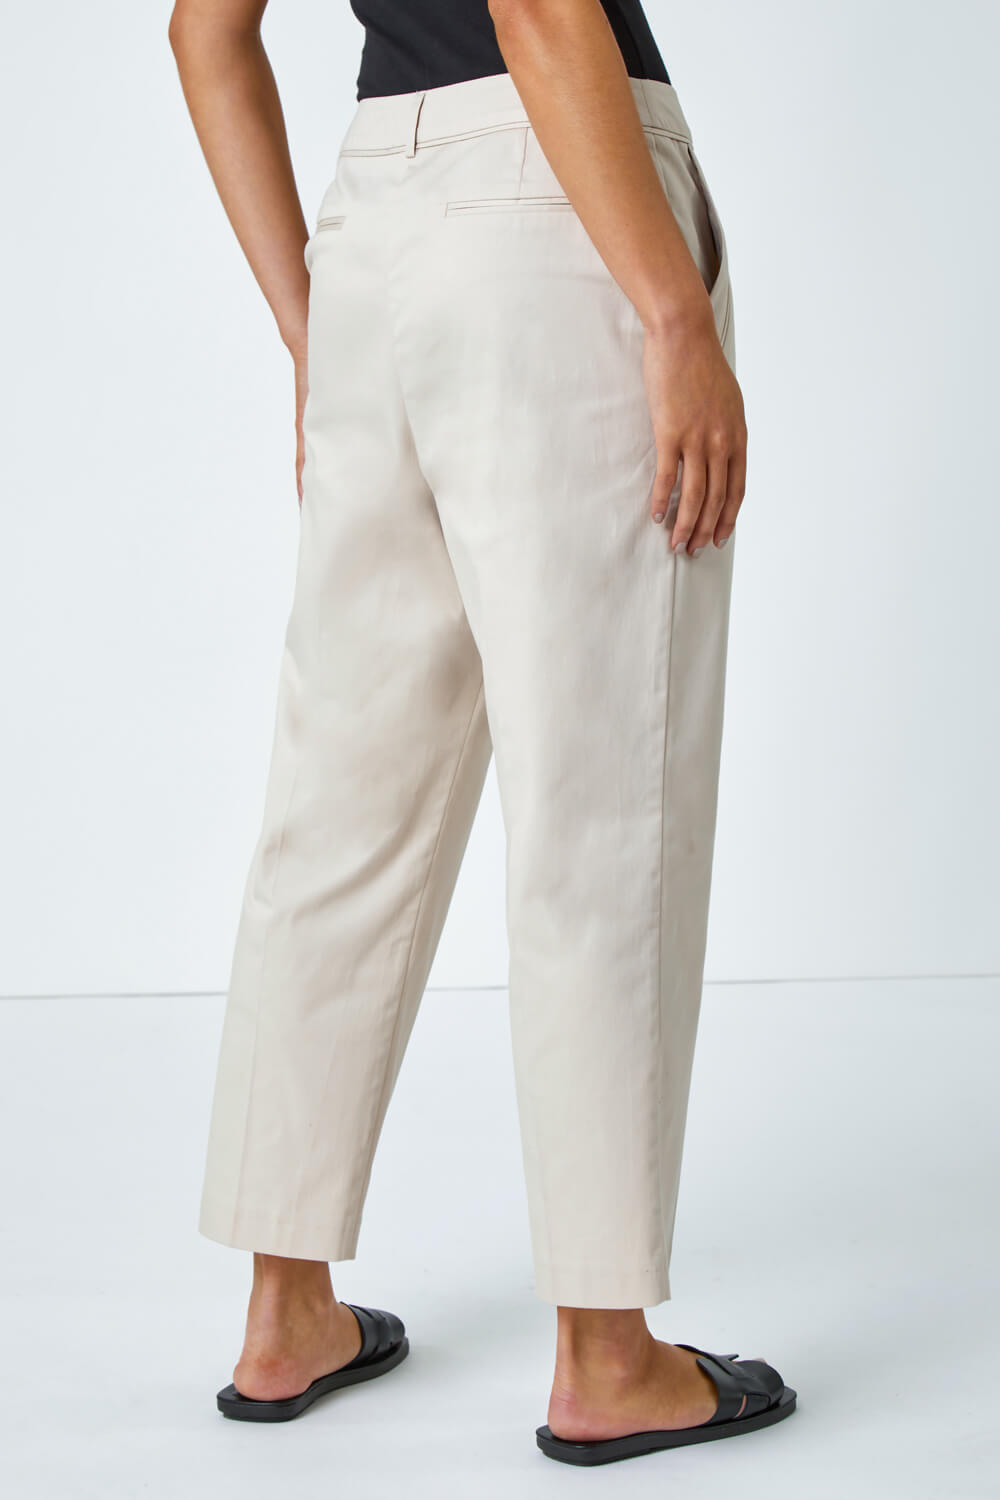 Stone Petite Cotton Blend Stretch Trousers, Image 3 of 5